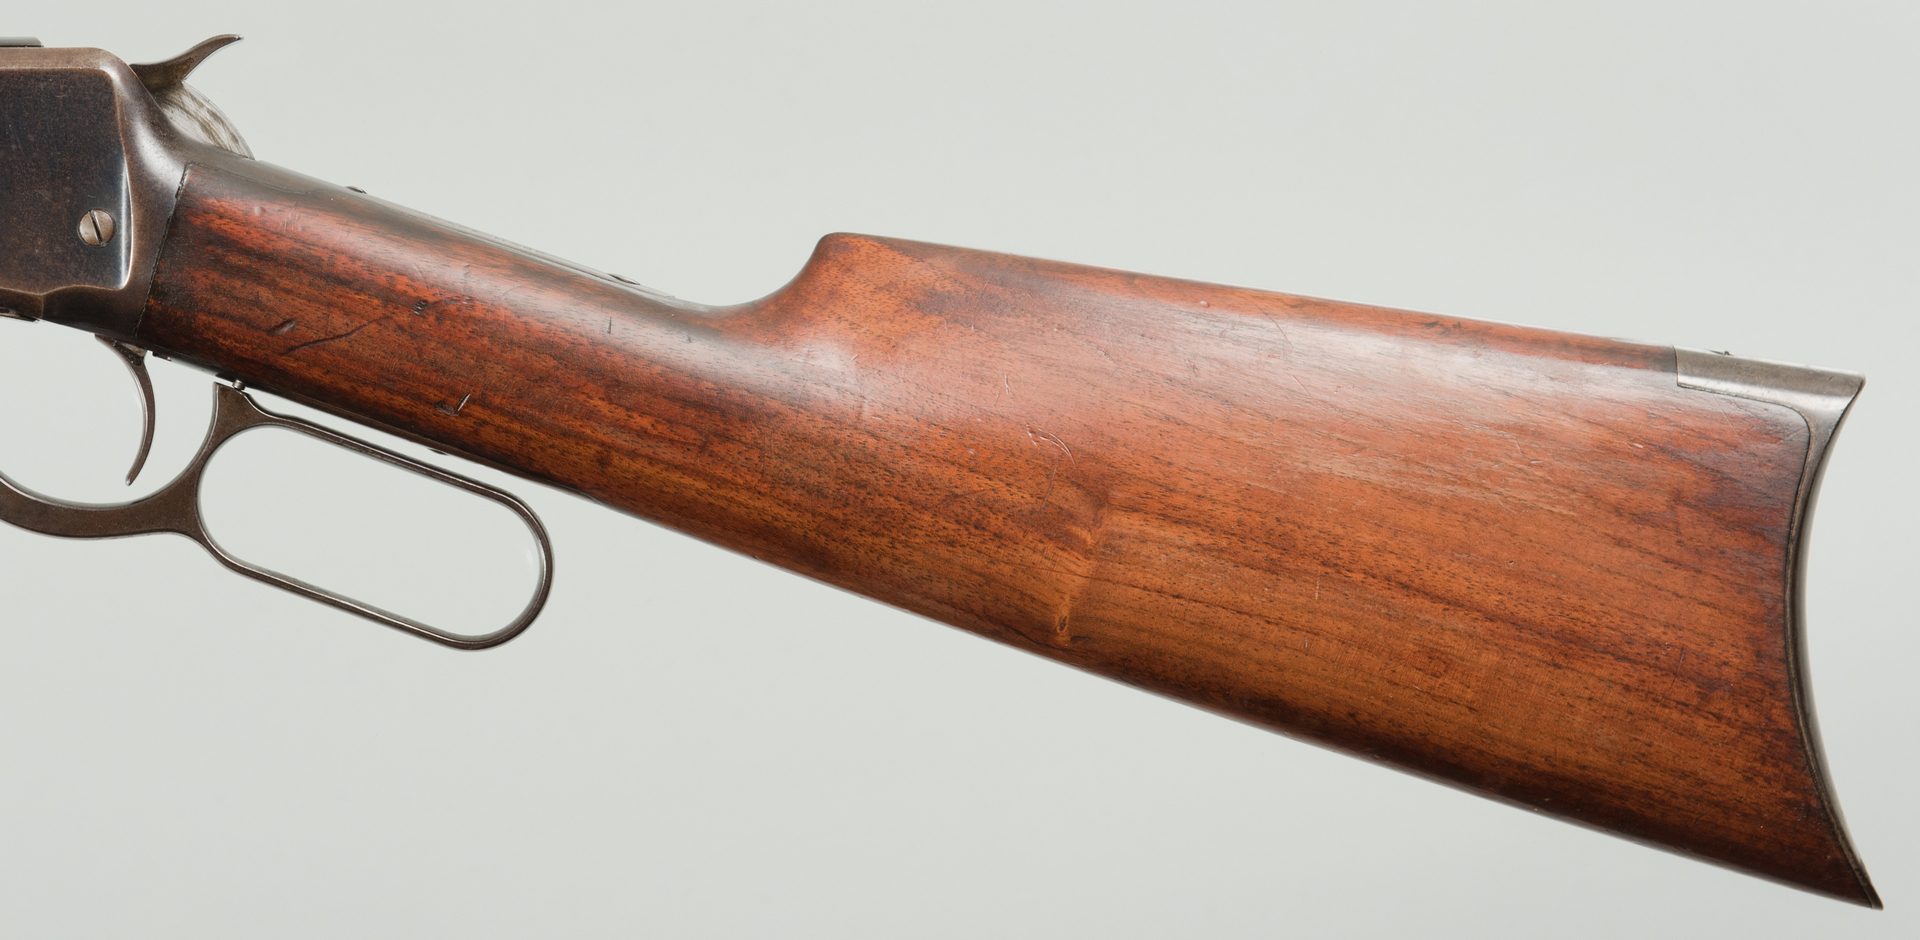 Lot 814: Winchester 1894 Lever Action Rifle, 25-35